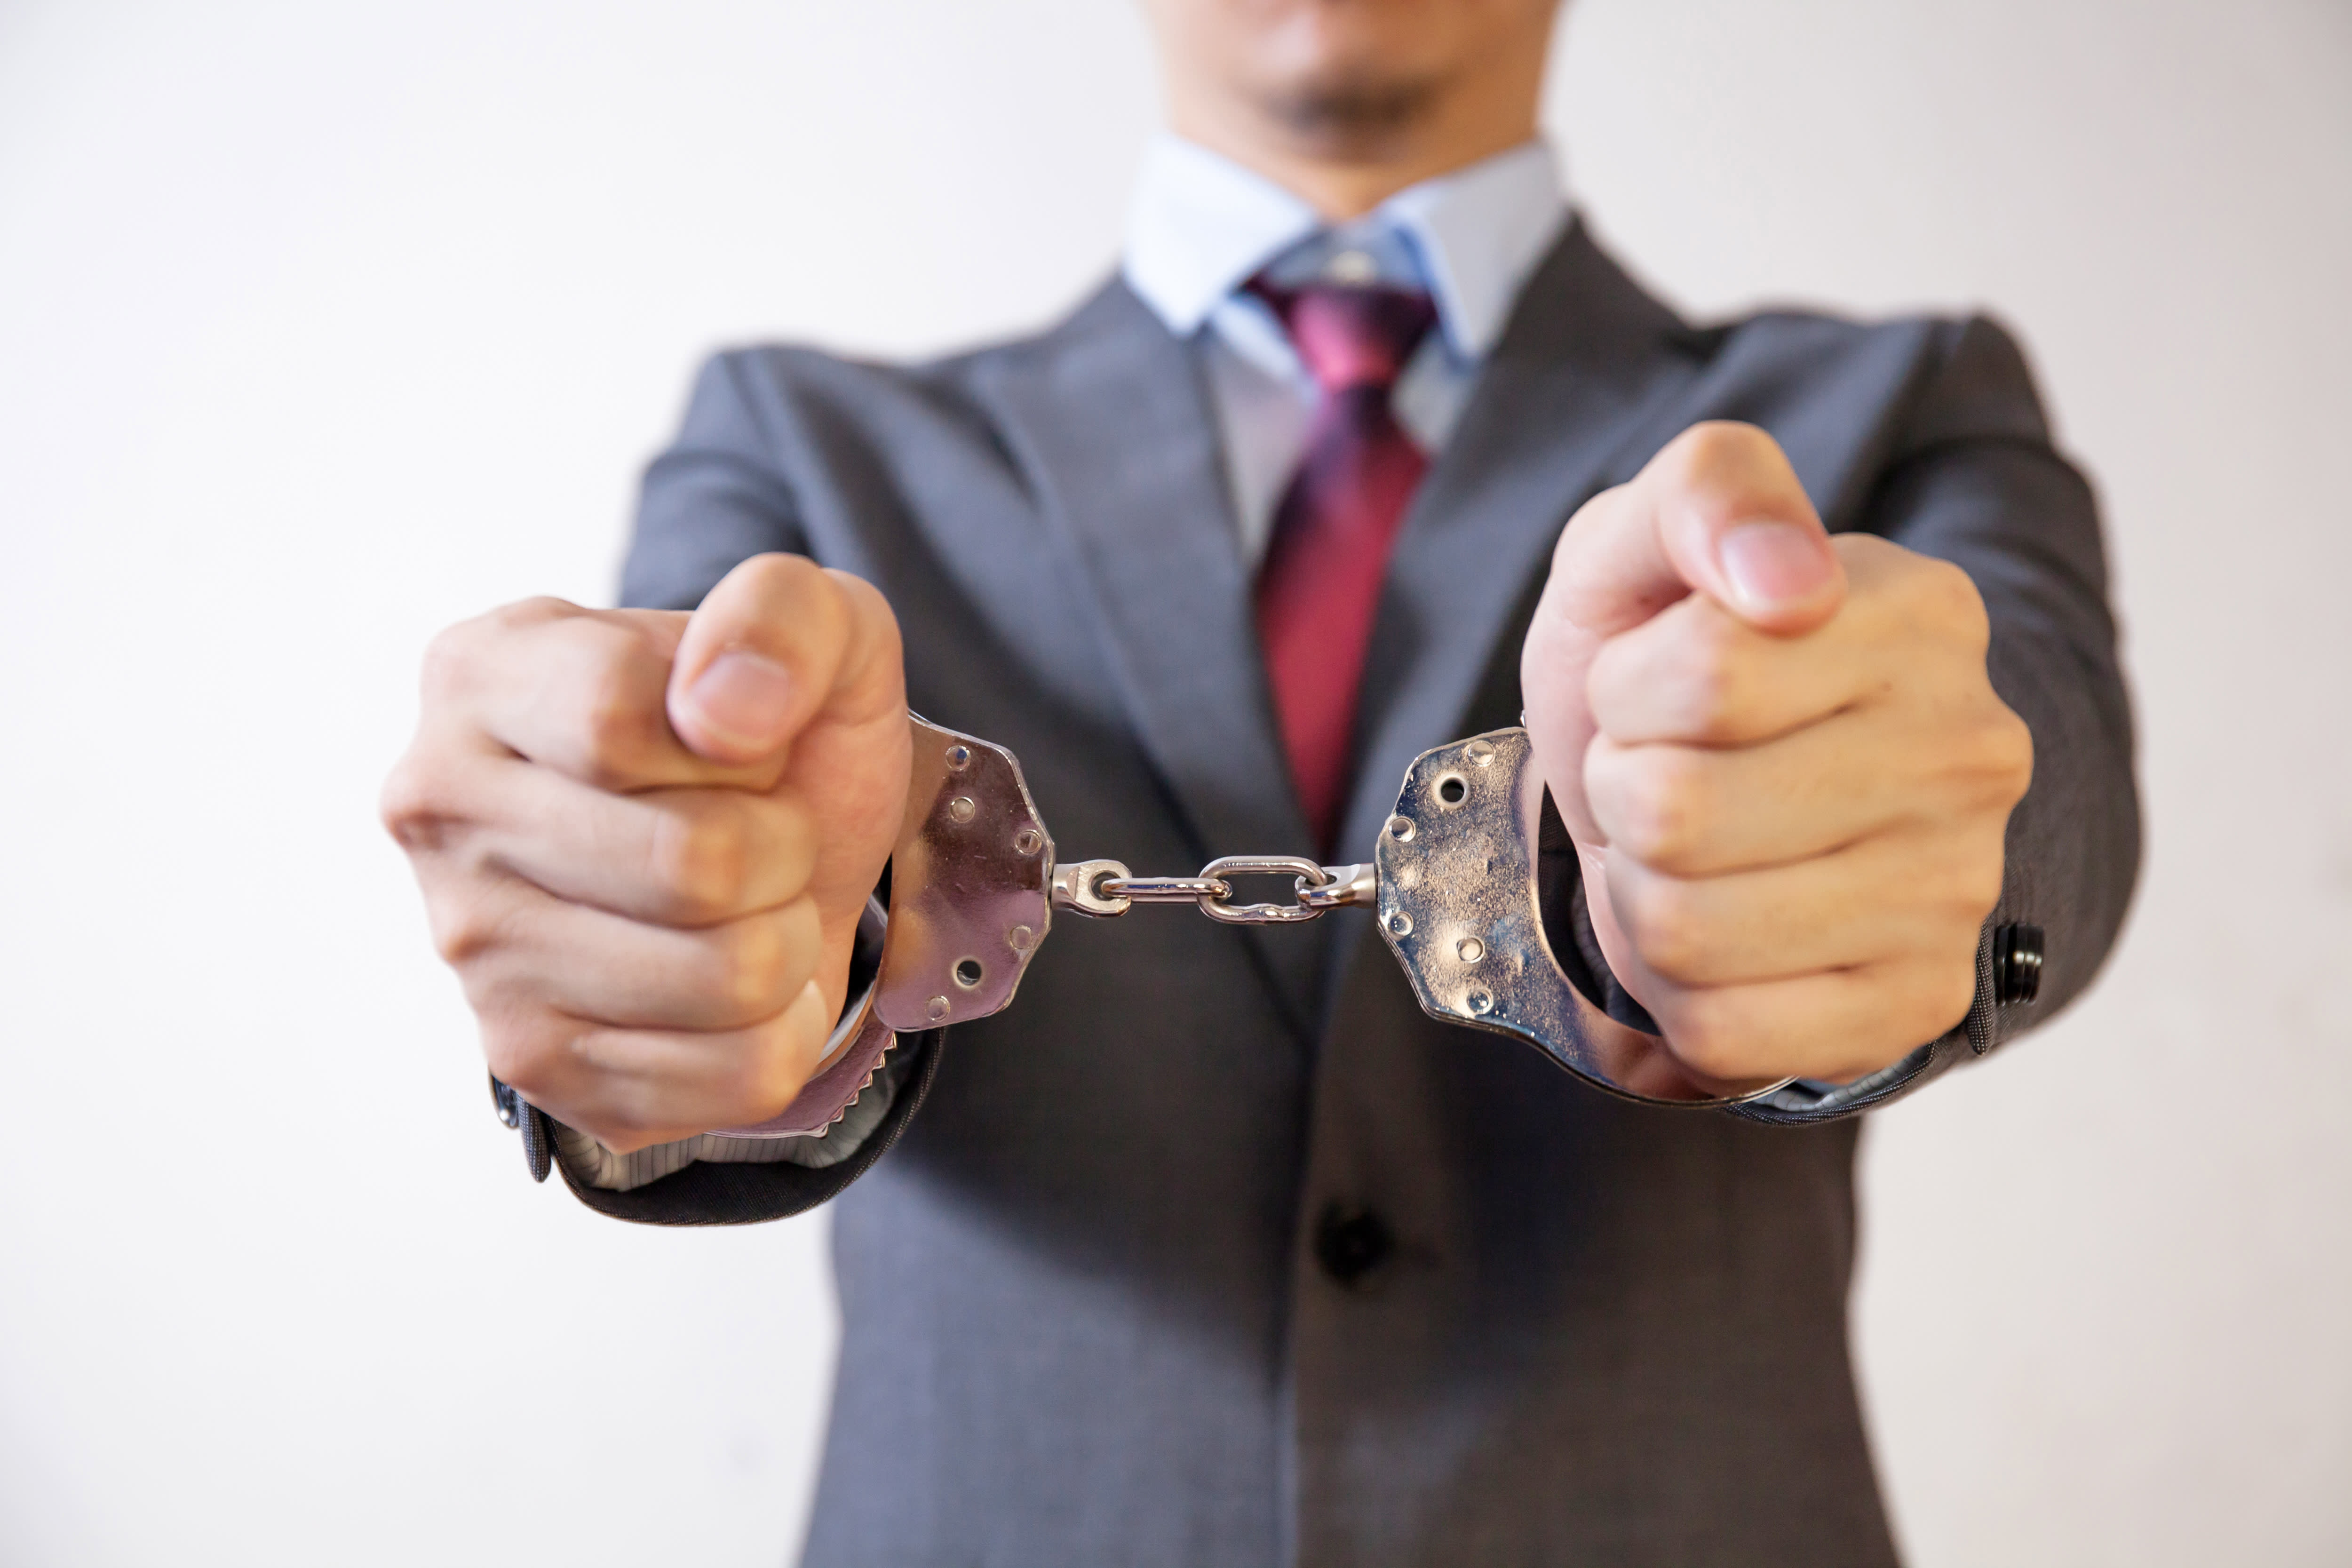 Greed, power, shame: the psychology of criminal managers